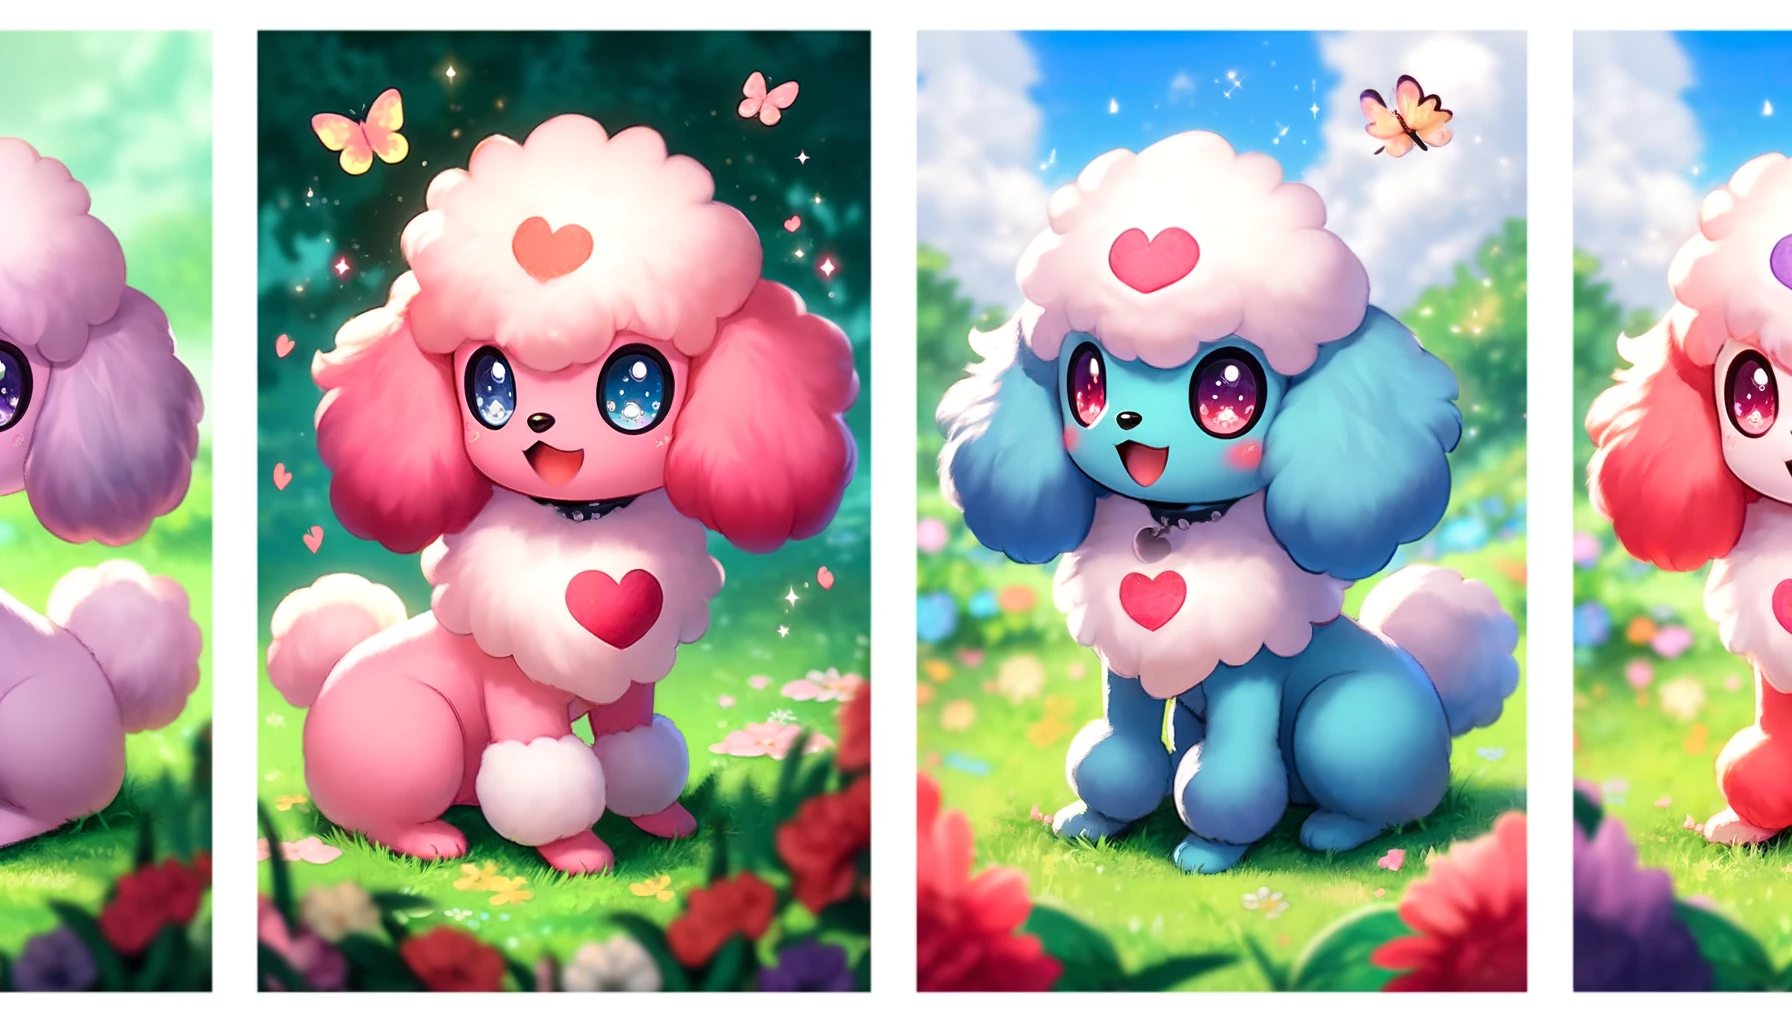 A series of charming images featuring a fictional poodle-like Pokémon, resembling Furfrou, named Trimmian. The first image captures a Trimmian with a heart-shaped trim, pink fur, and sparkling eyes, looking playful and adorable. The second image showcases a Trimmian with star-shaped patterns shaved into its fur, in a cheerful, bright blue color, adding to its whimsical appeal. Both scenes are set in a lush park with flowers and butterflies, enhancing the cute and magical vibe of these creatures, making them seem delightful and endearing to viewers.